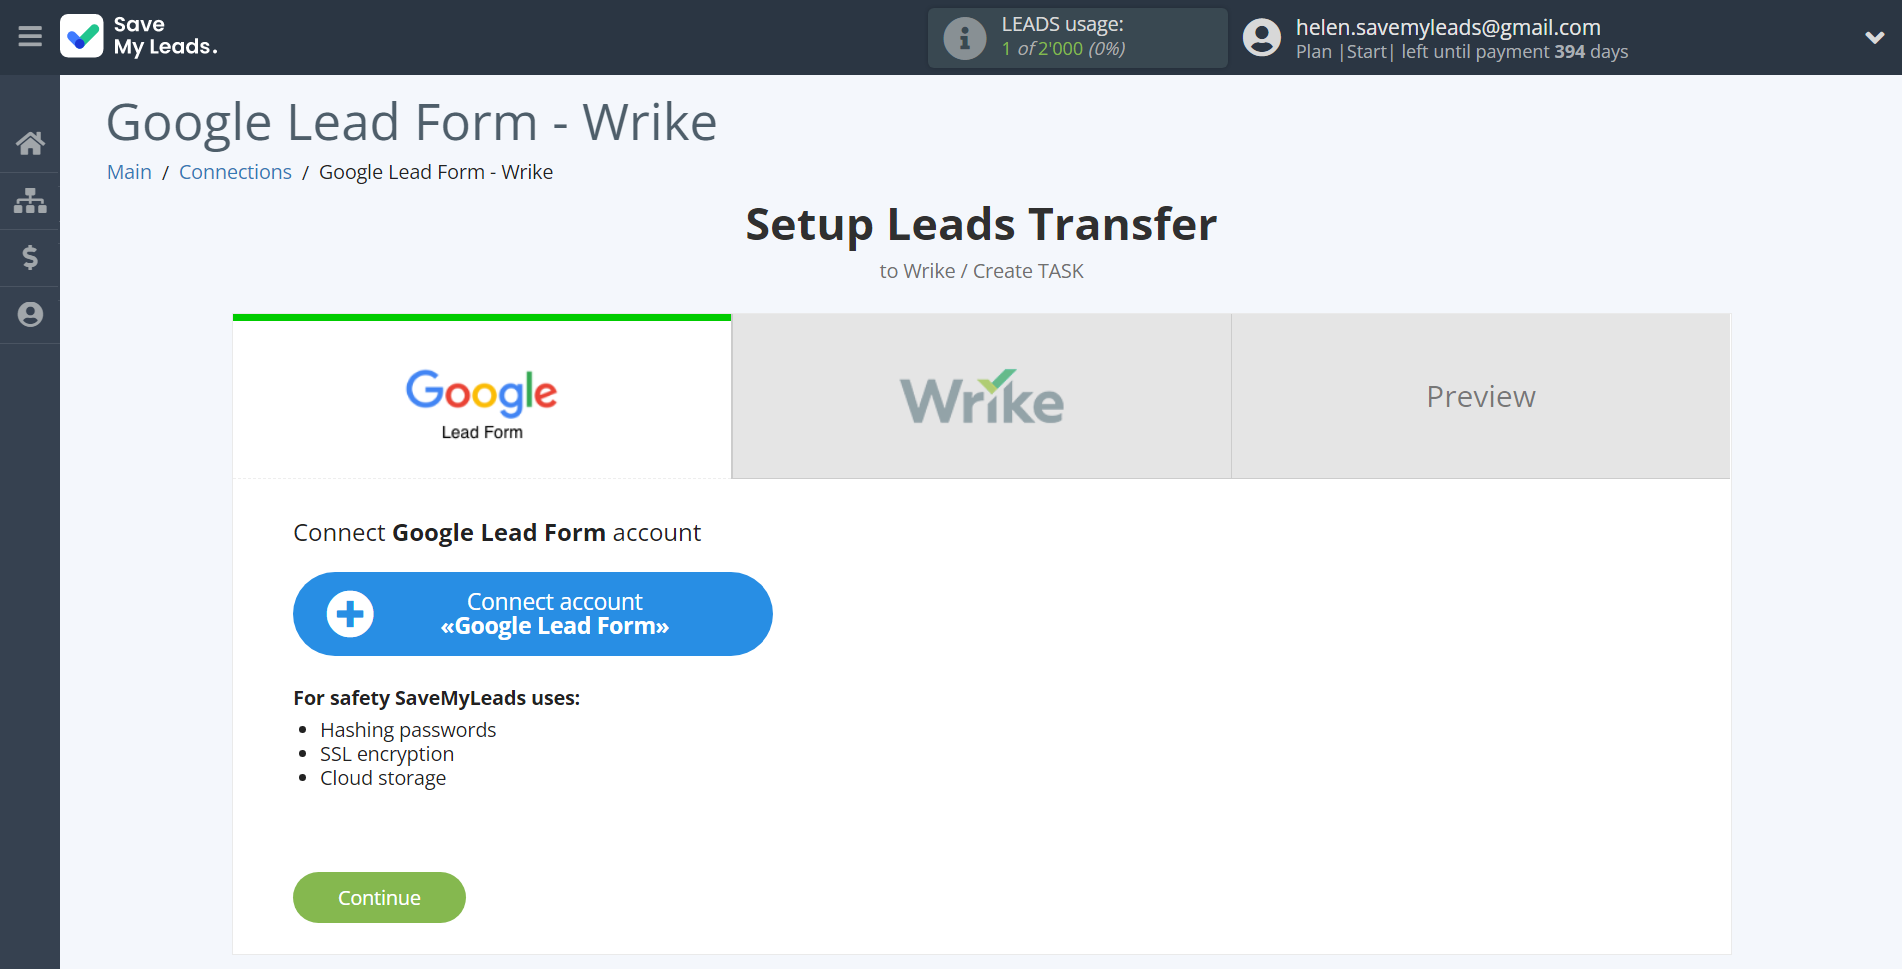 How to Connect Google Lead Form with Wrike | Data Source account